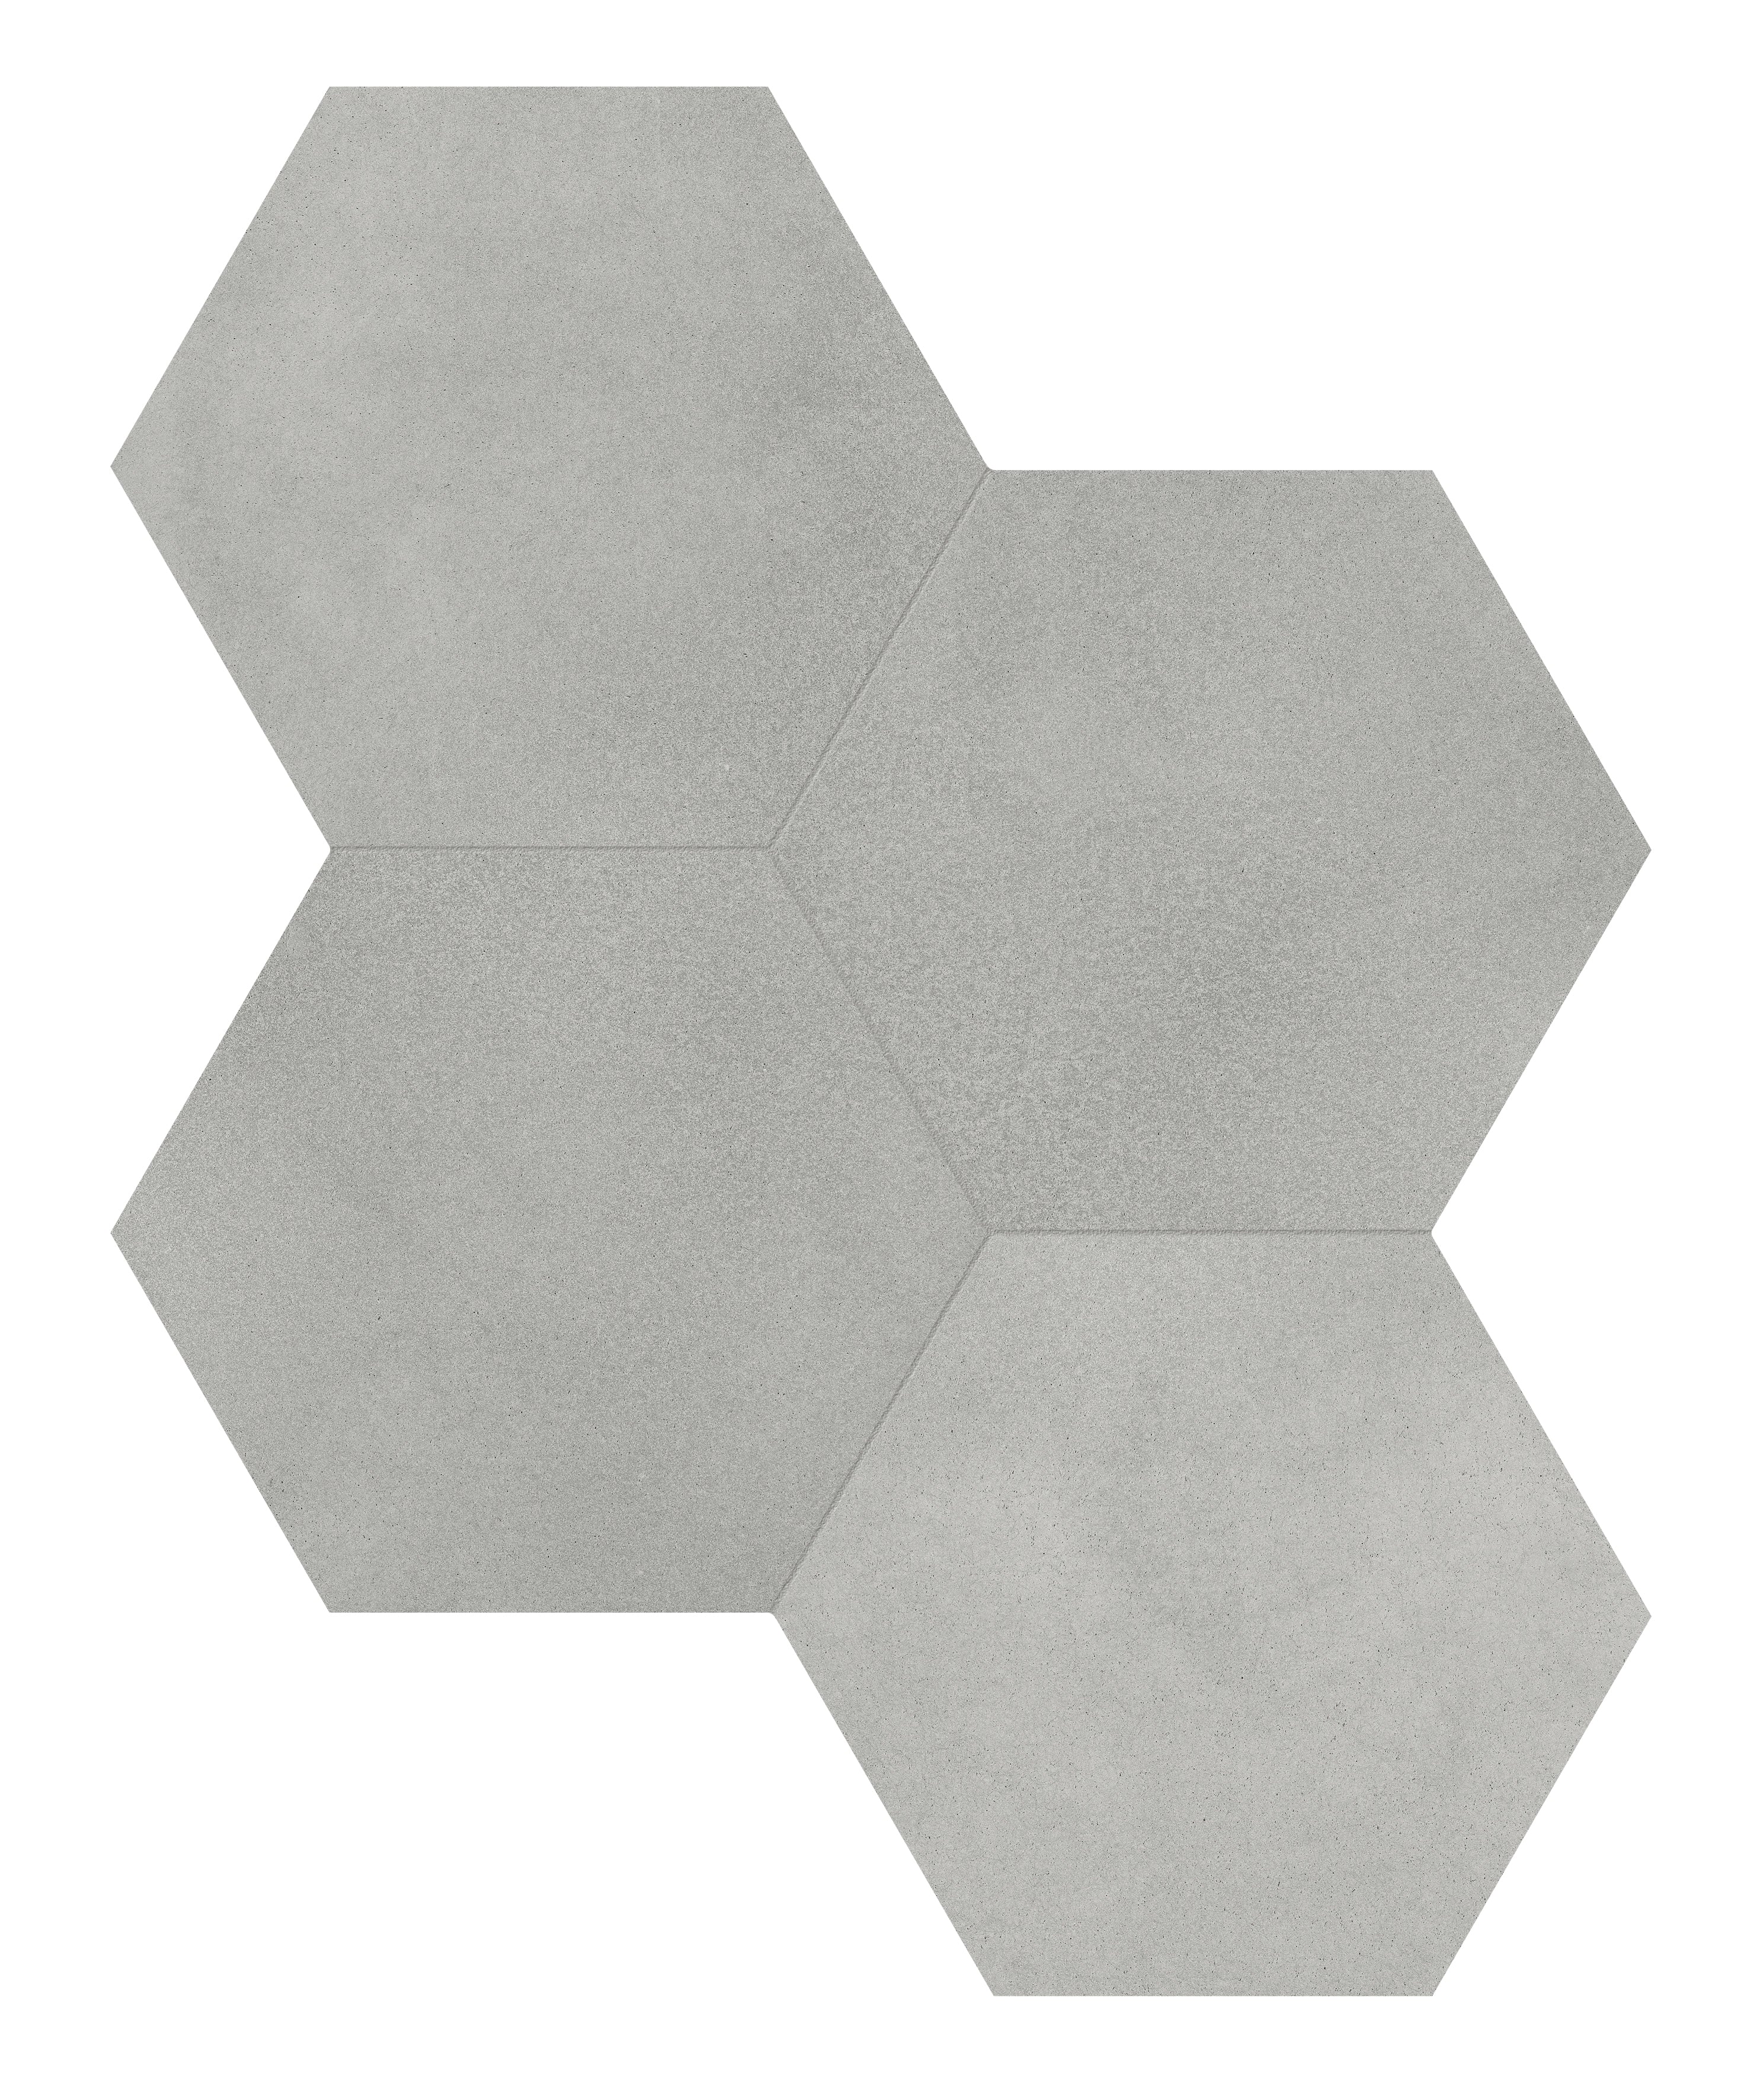 wool pattern glazed porcelain field tile from tapestri anatolia collection distributed by surface group international matte finish pressed edge 8&5 hexagon shape